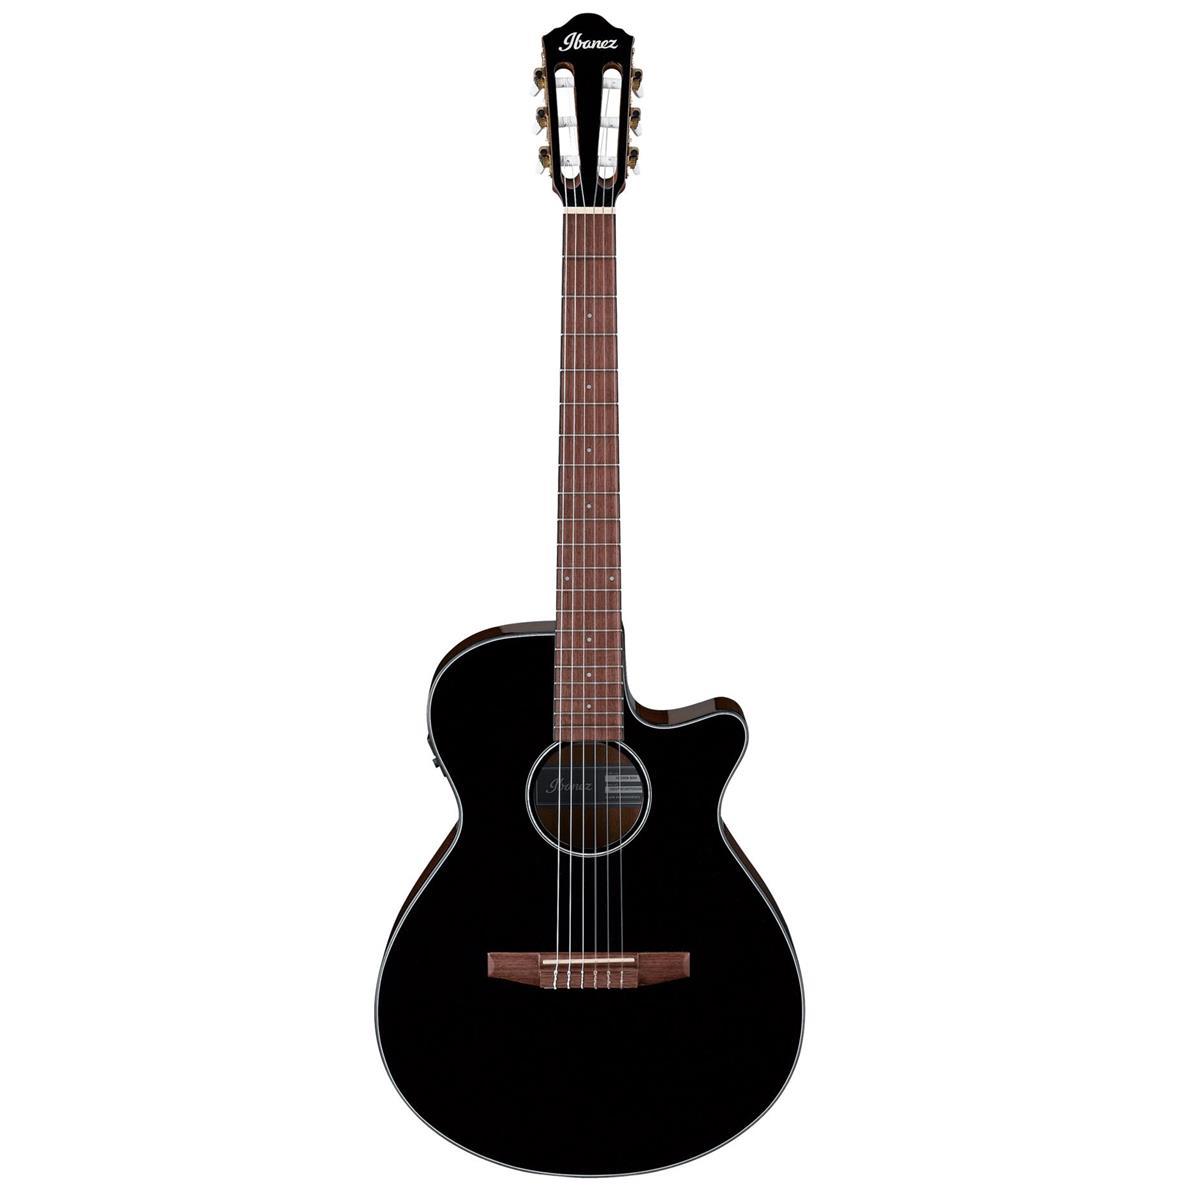 Ibanez AEG50N 6-String Acoustic Electric Guitar for $219 Shipped